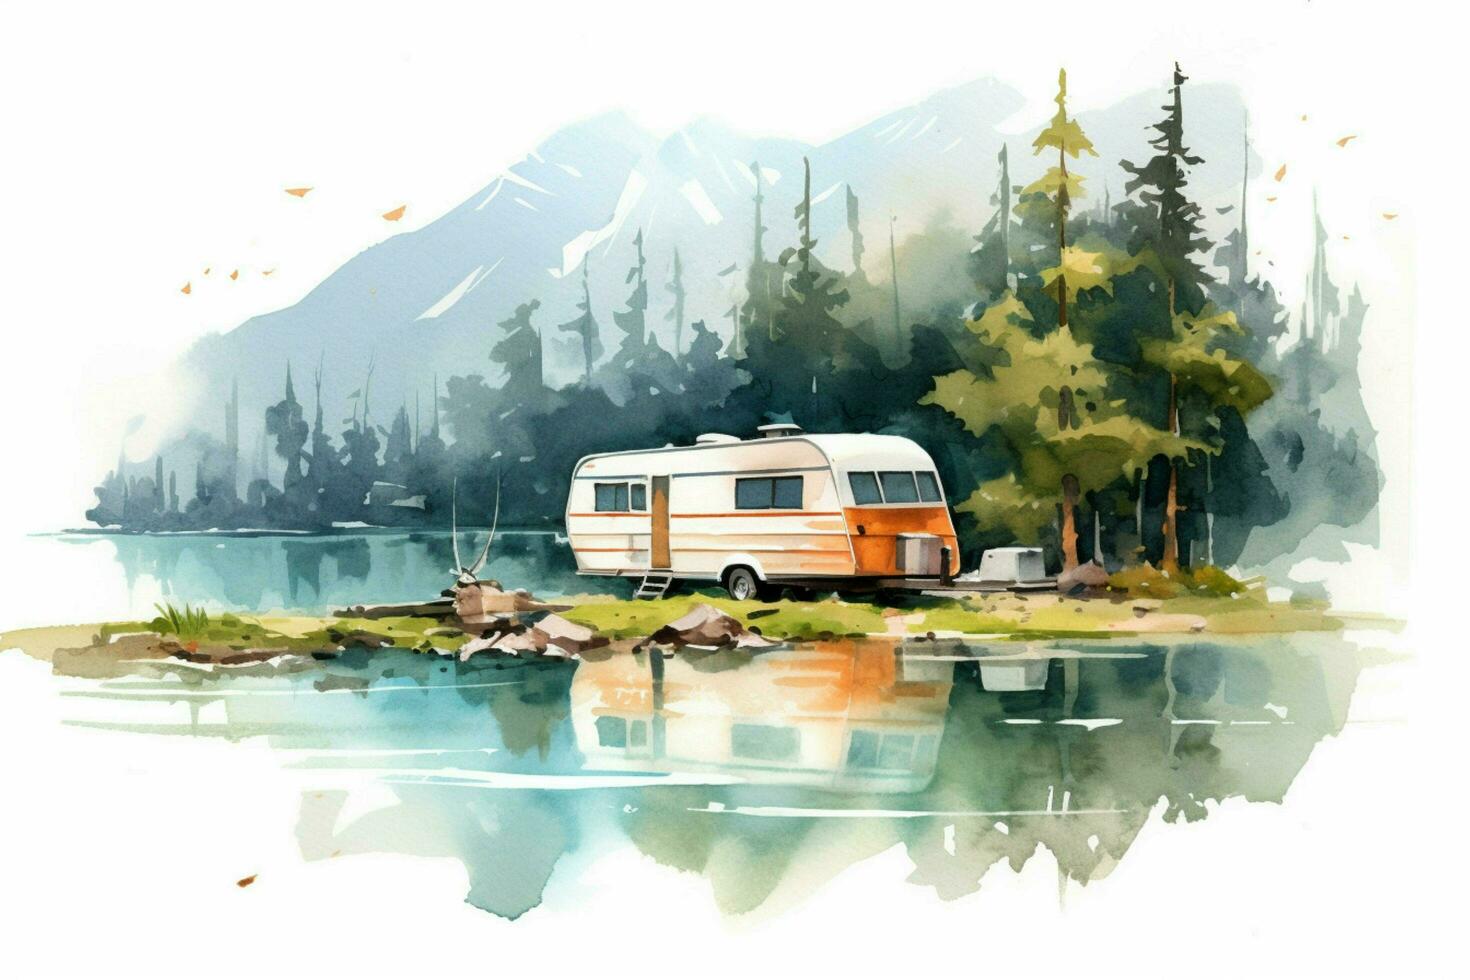 camping in mountain lake with travel trailer wate photo